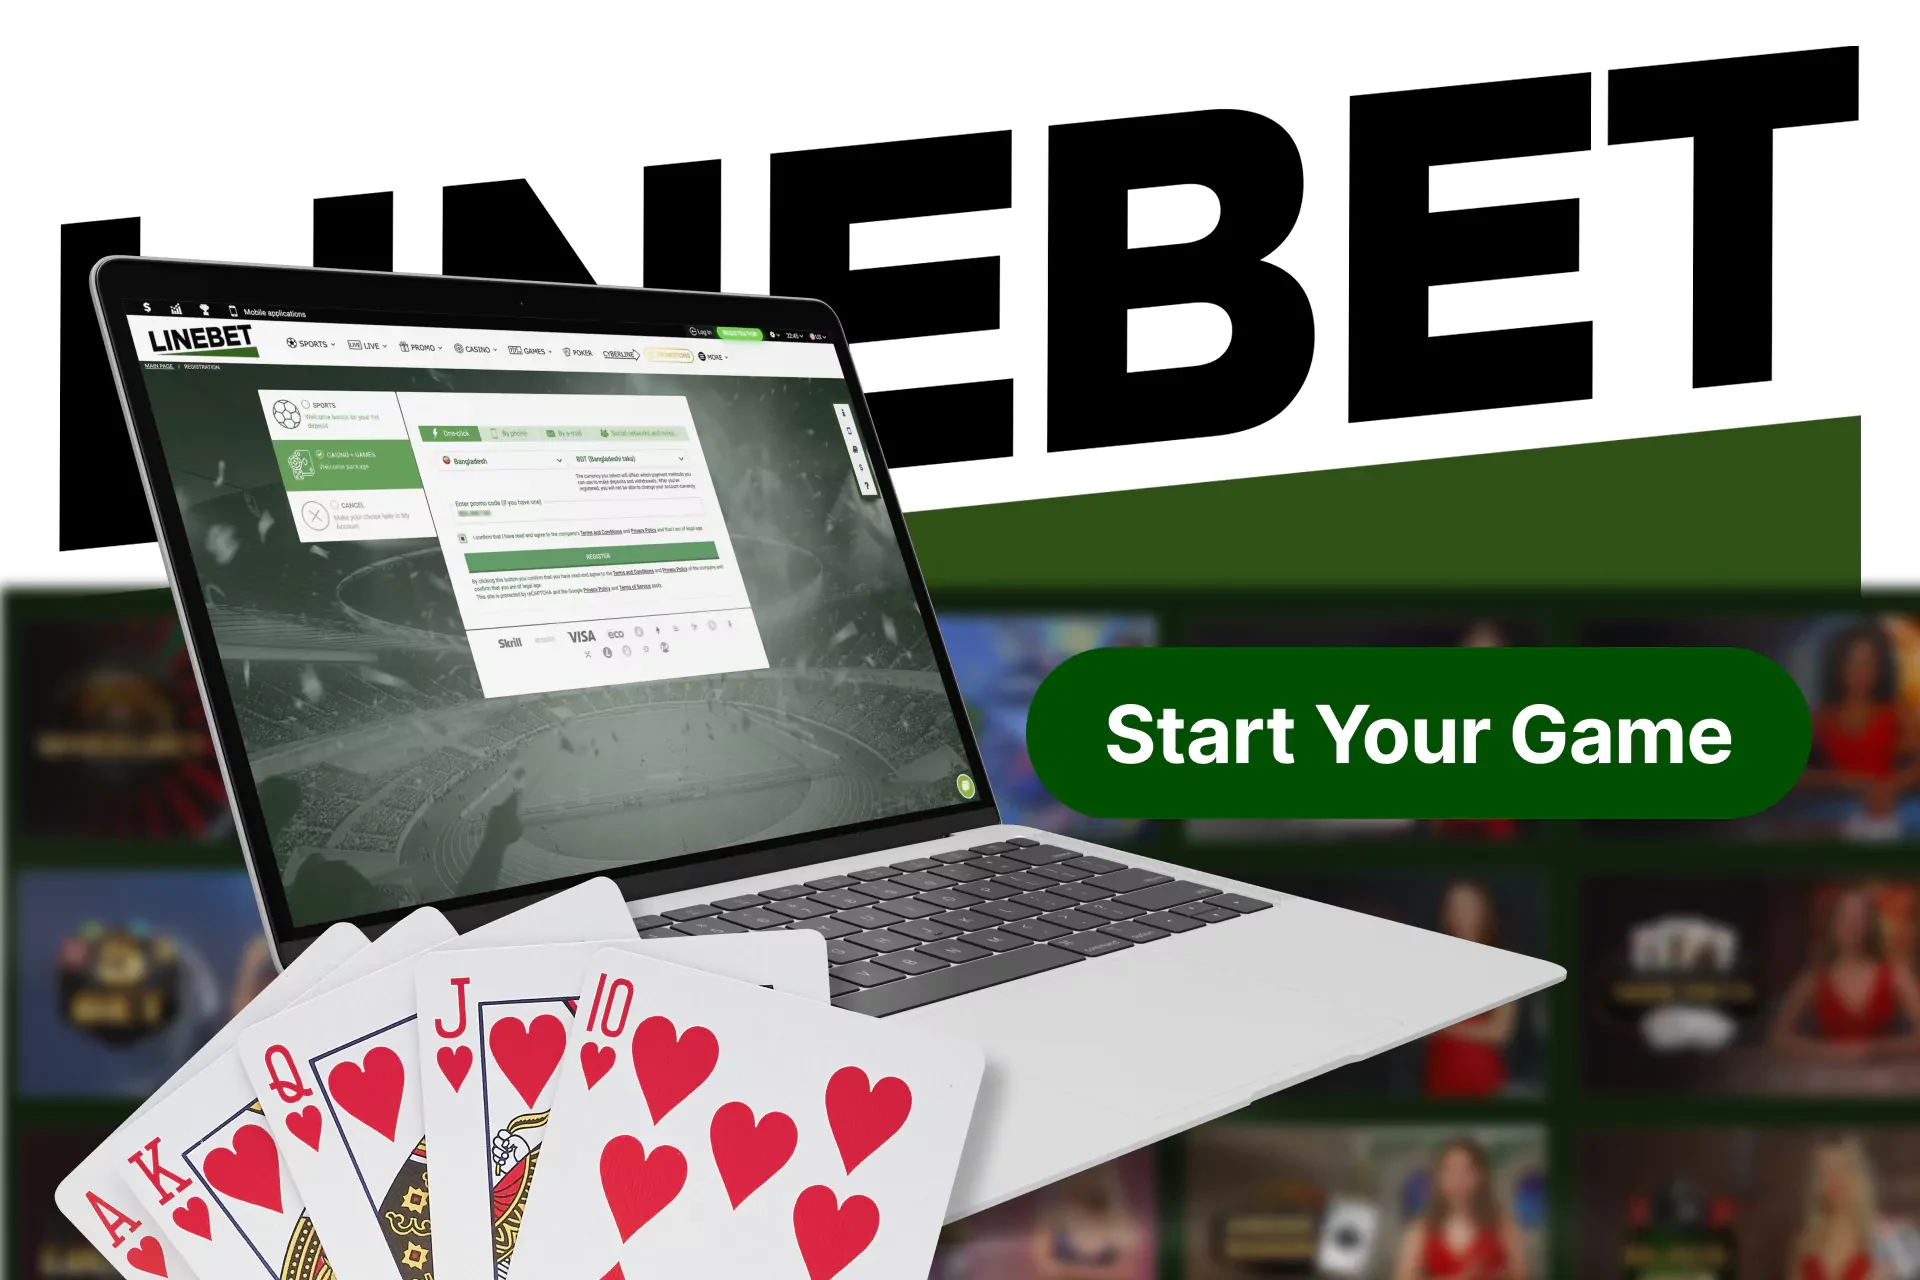 Find out how easy it is to start playing and betting on TV games from Linebet.